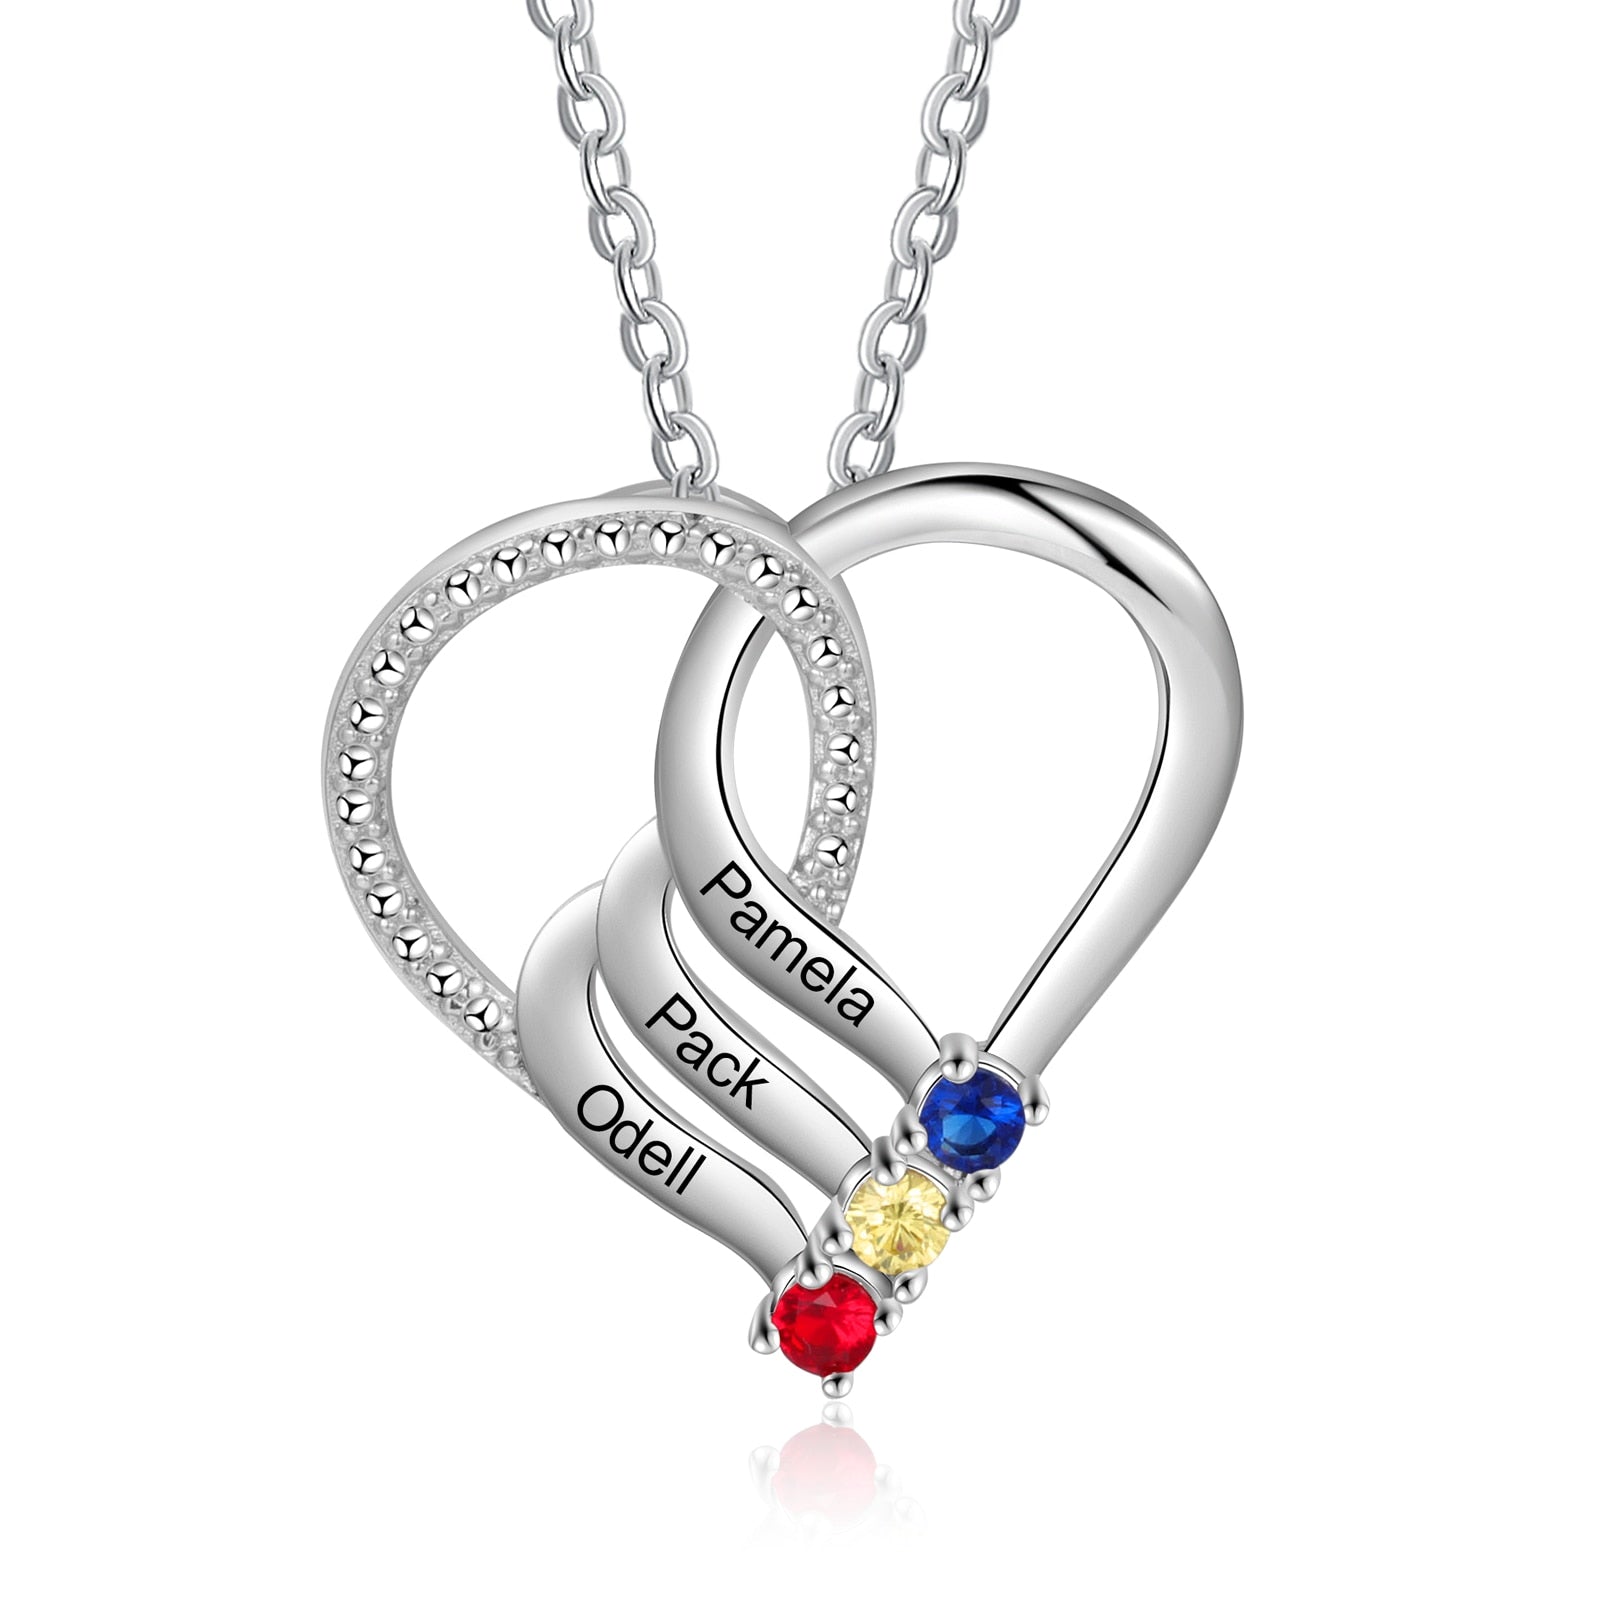 Personalized Family Heart Pendant Necklace with 2-6 Birthstones and Name Engraving